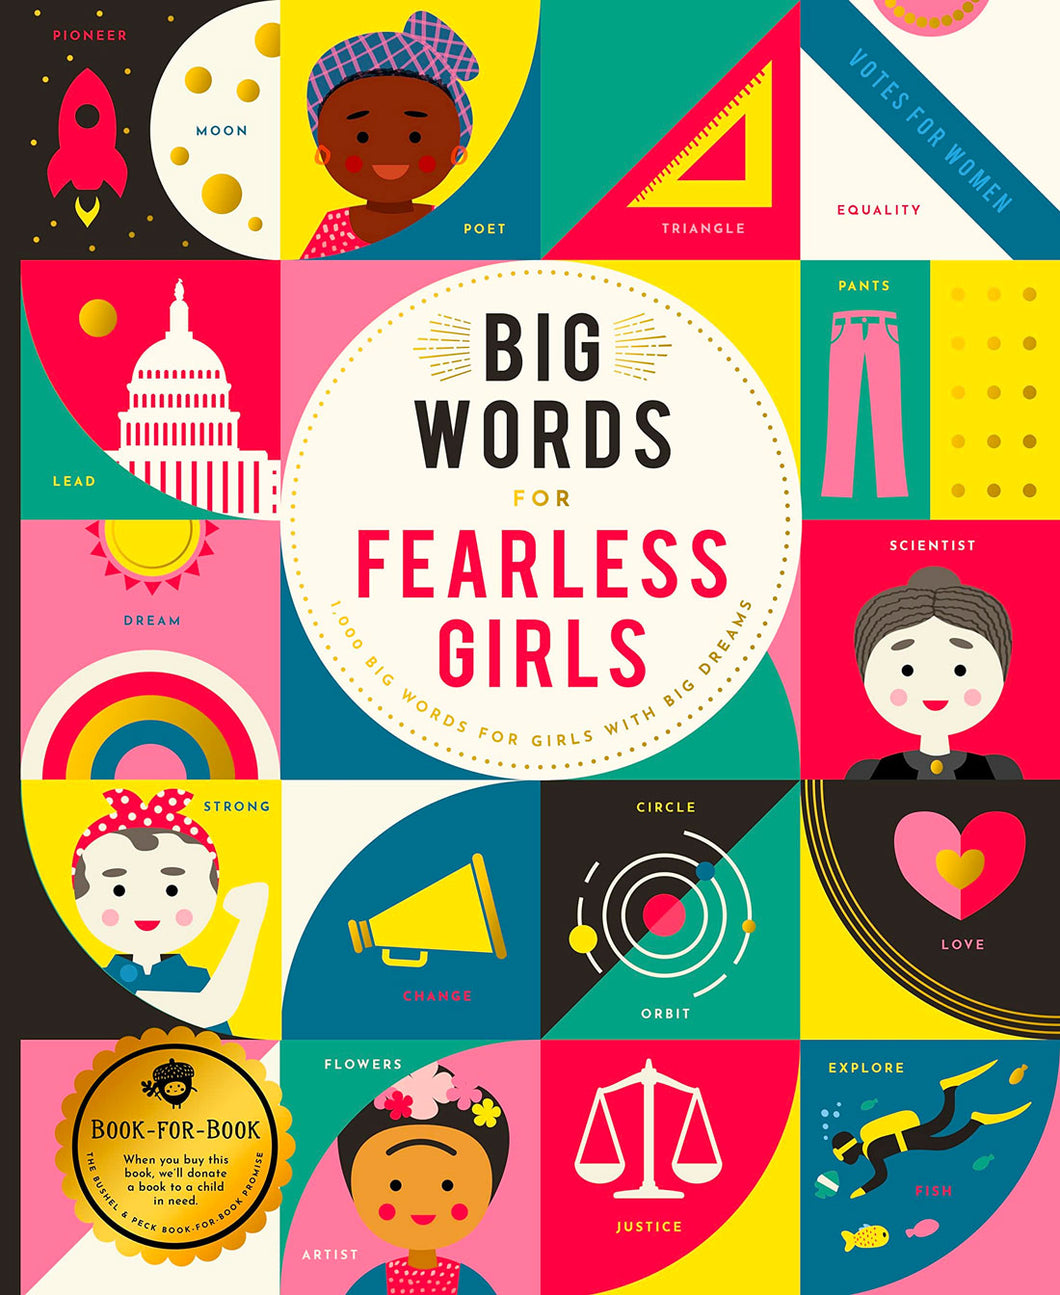 Big Words for Fearless Girls by David Miles / Board Book - NEW BOOK